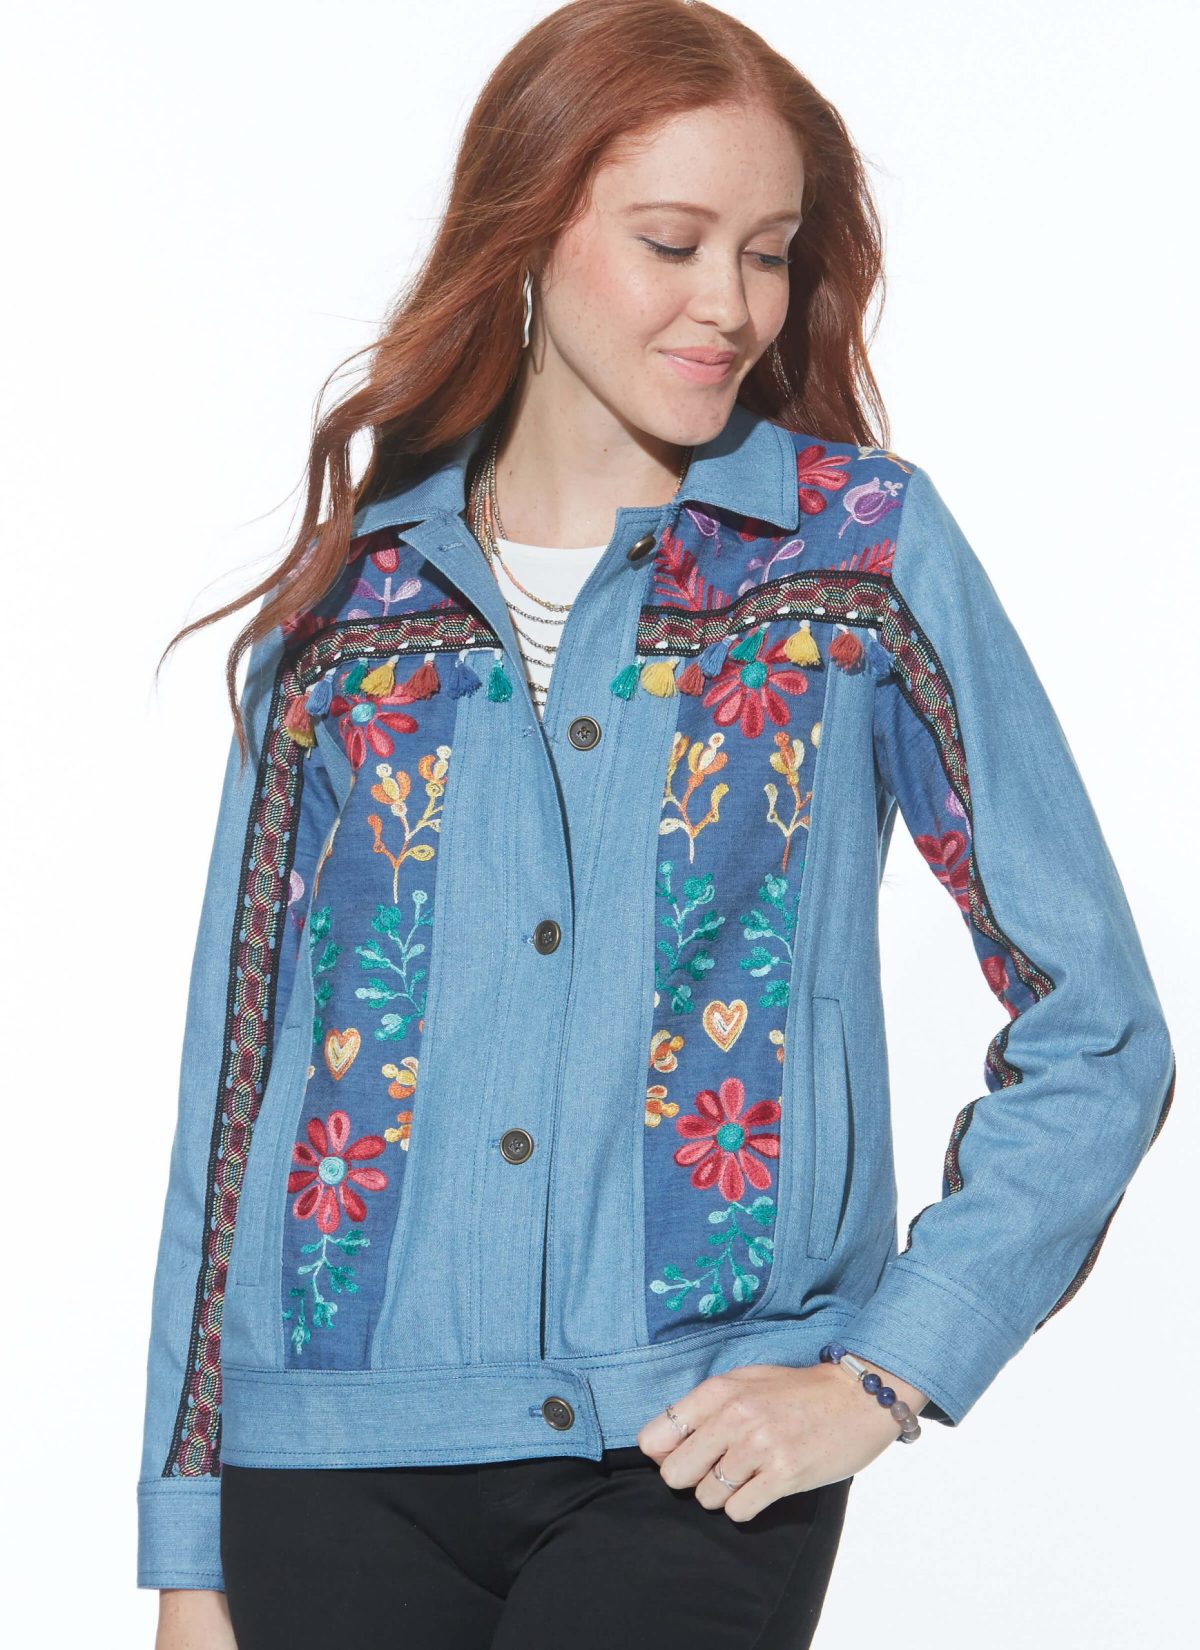 McCall's Sewing Pattern M7729 Misses' Jackets and Vest